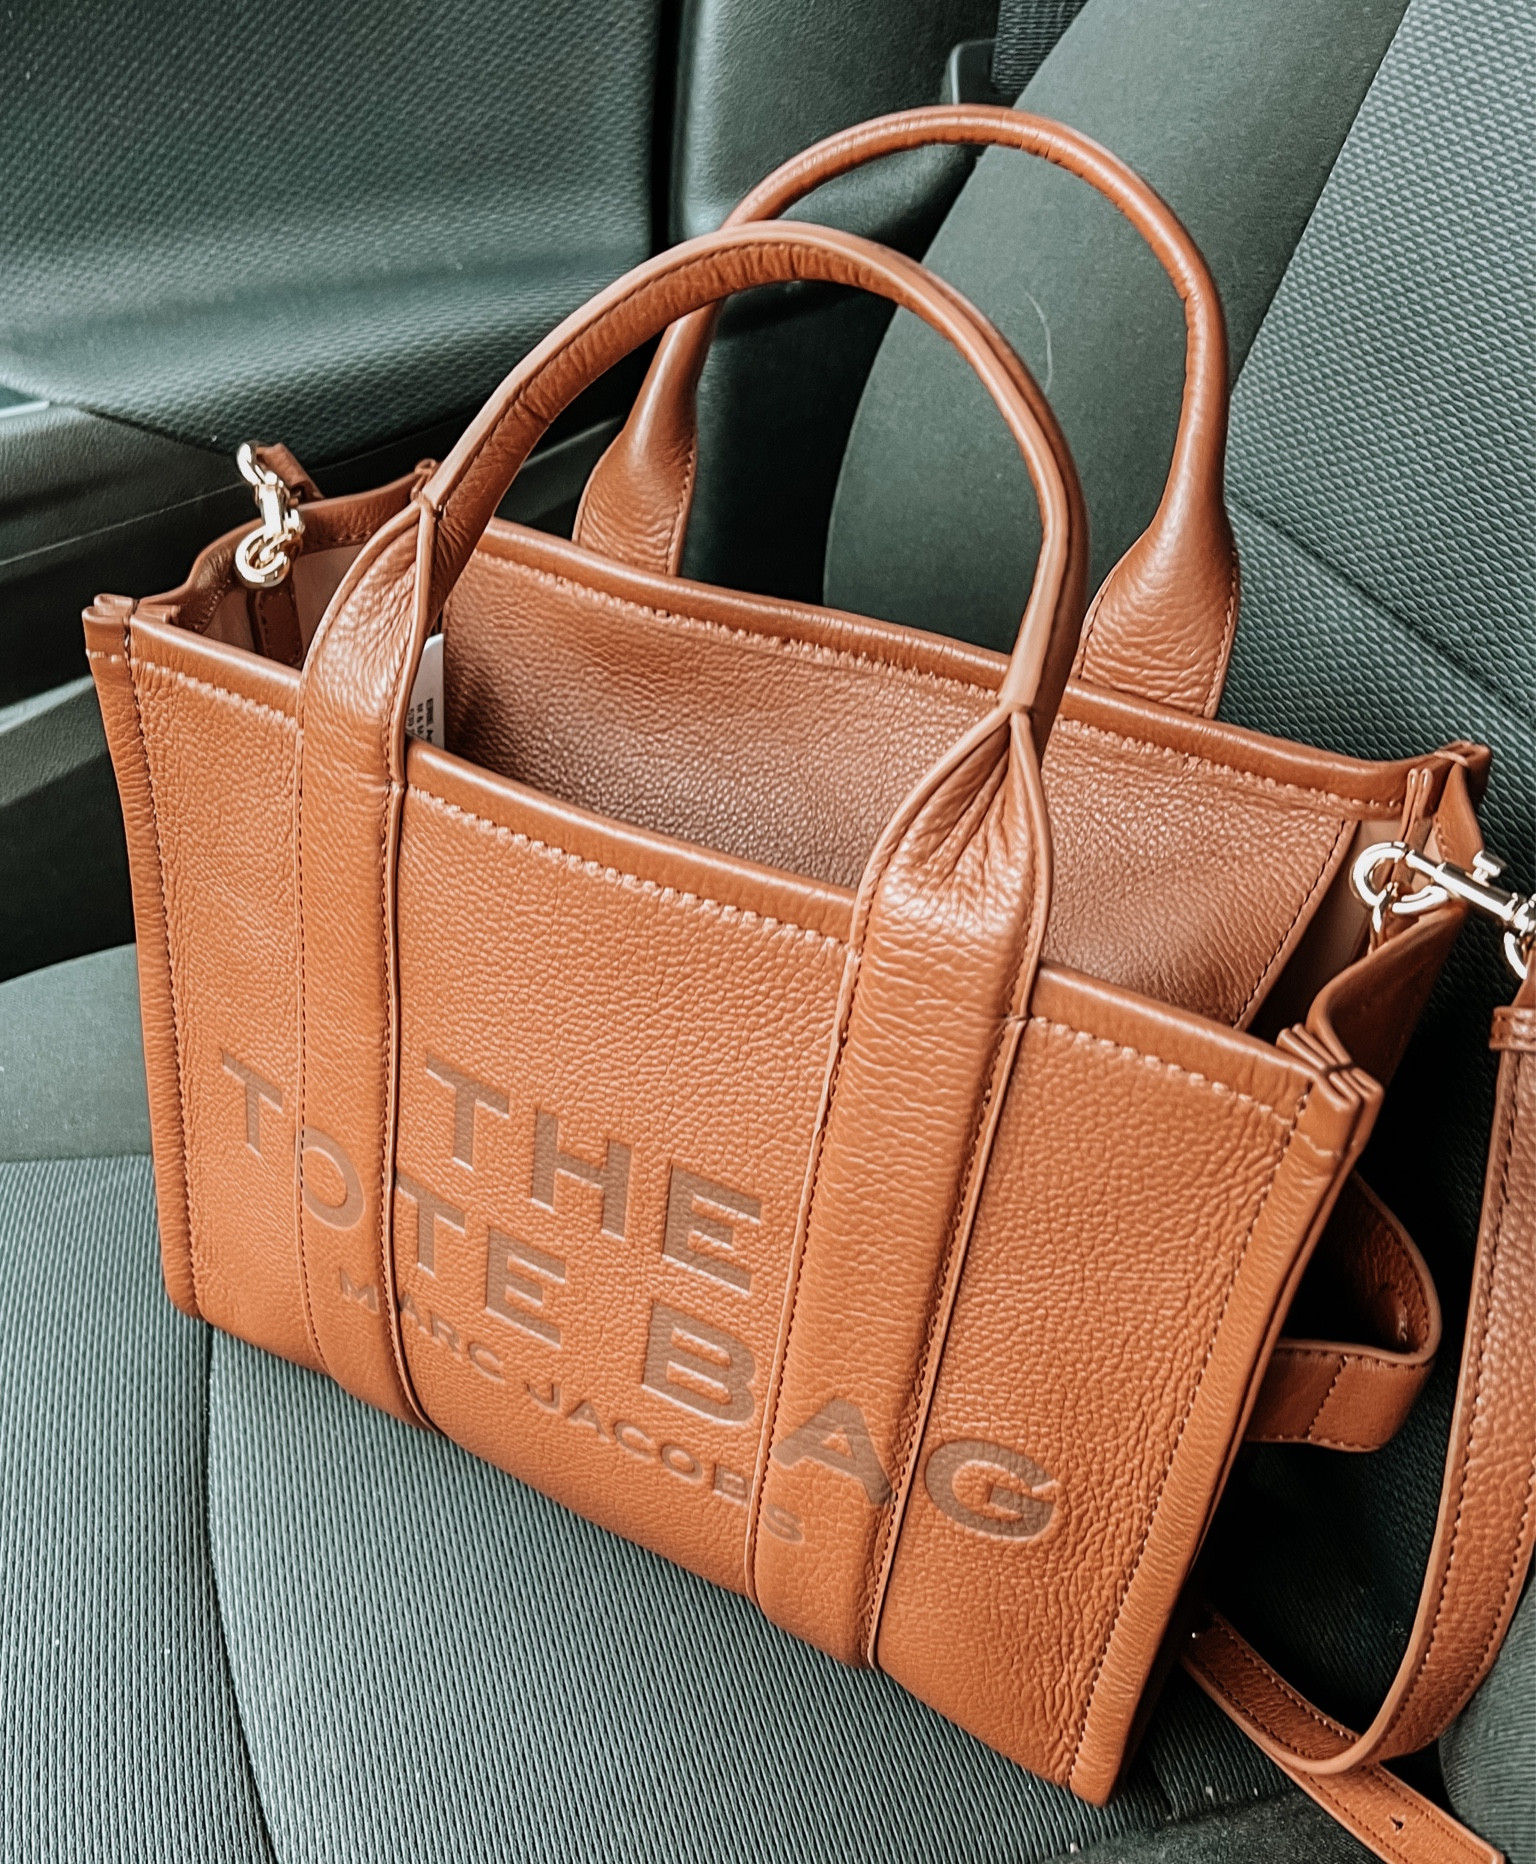 Best Marc Jacobs Tote Bag Dupes You Need